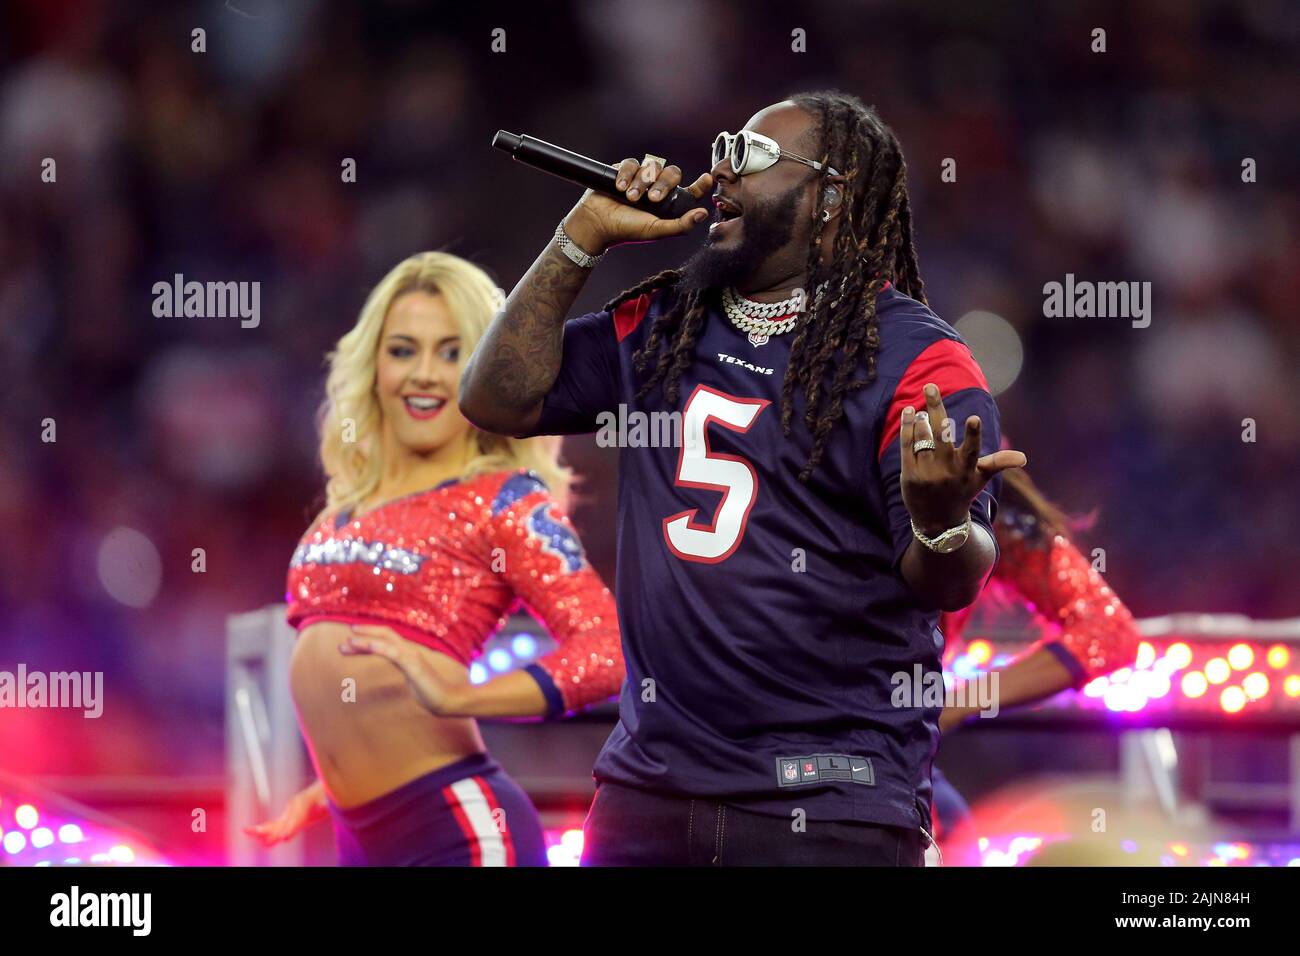 Houston, Texas, USA. 4th Jan, 2020. Rapper and recording artist T-Pain  performs during halftime of the AFC Wild Card playoff game between the  Houston Texans and the Buffalo Bills at NRG Stadium